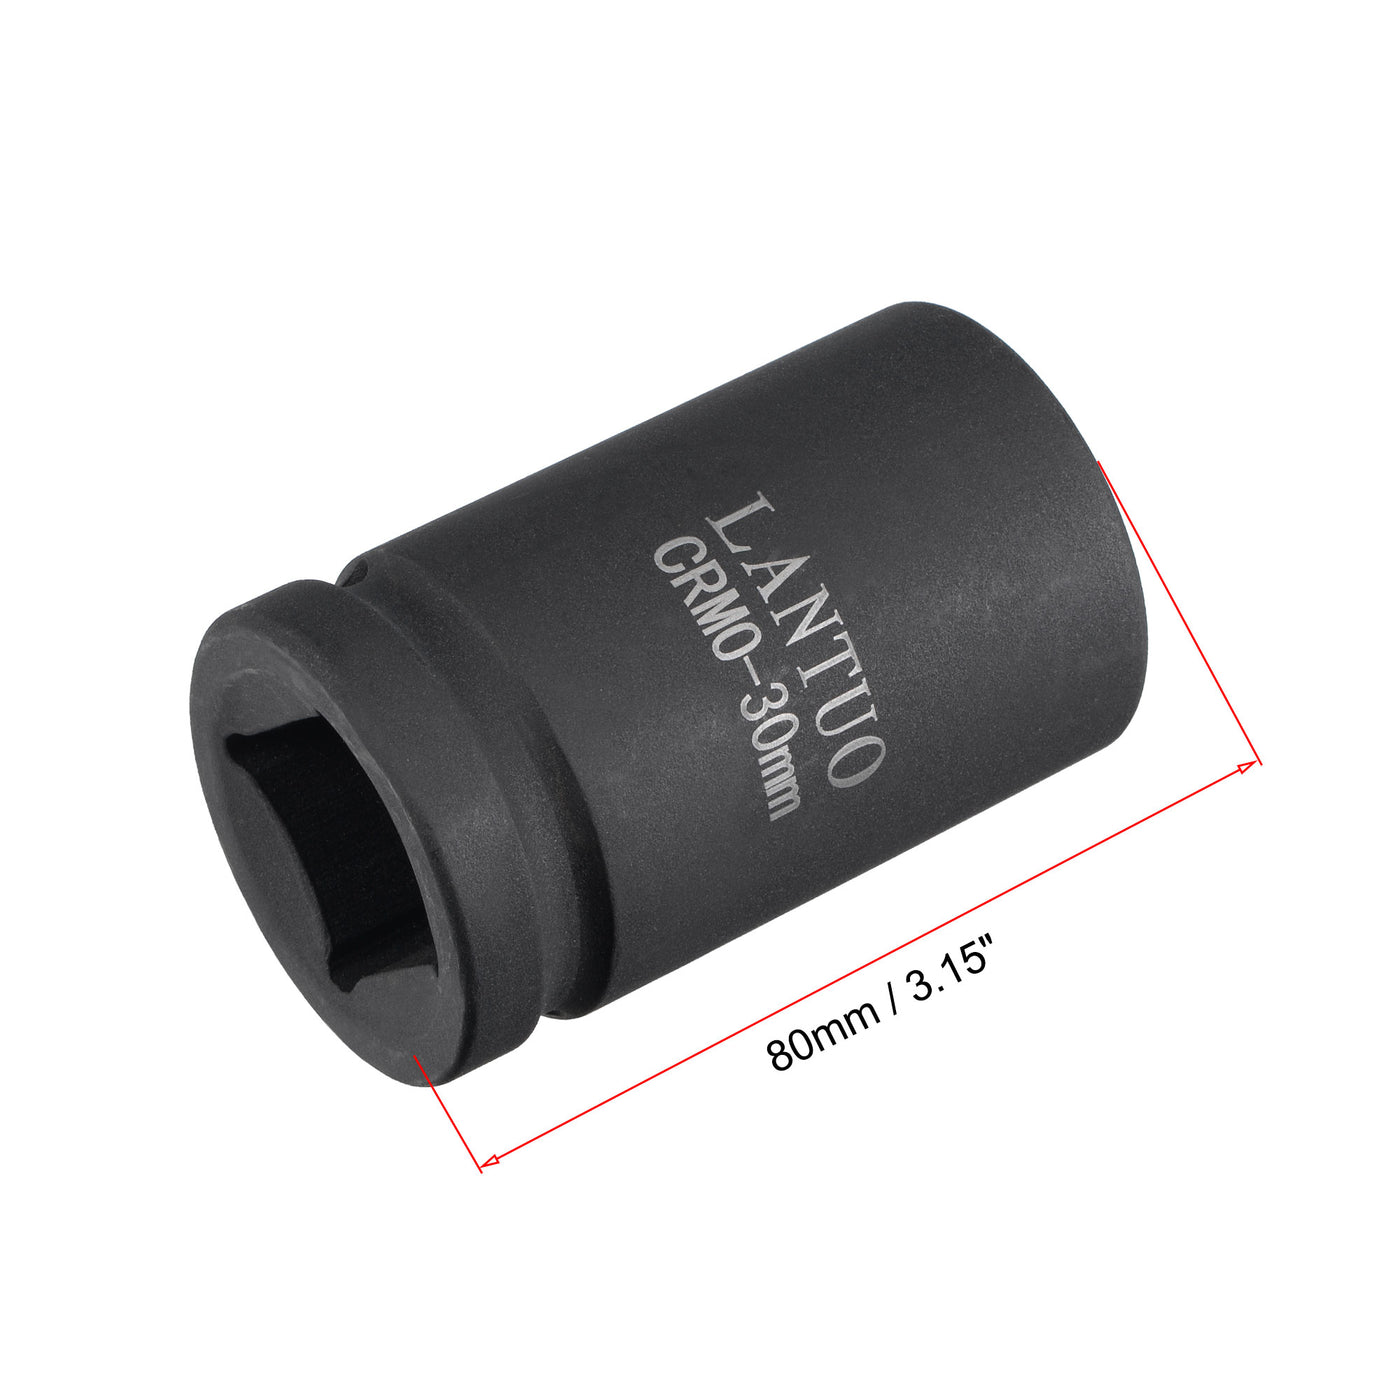 Uxcell Uxcell 1" Drive by 32mm 6-Point Impact Socket, CR-MO 80mm Length, Standard Metric Sizes